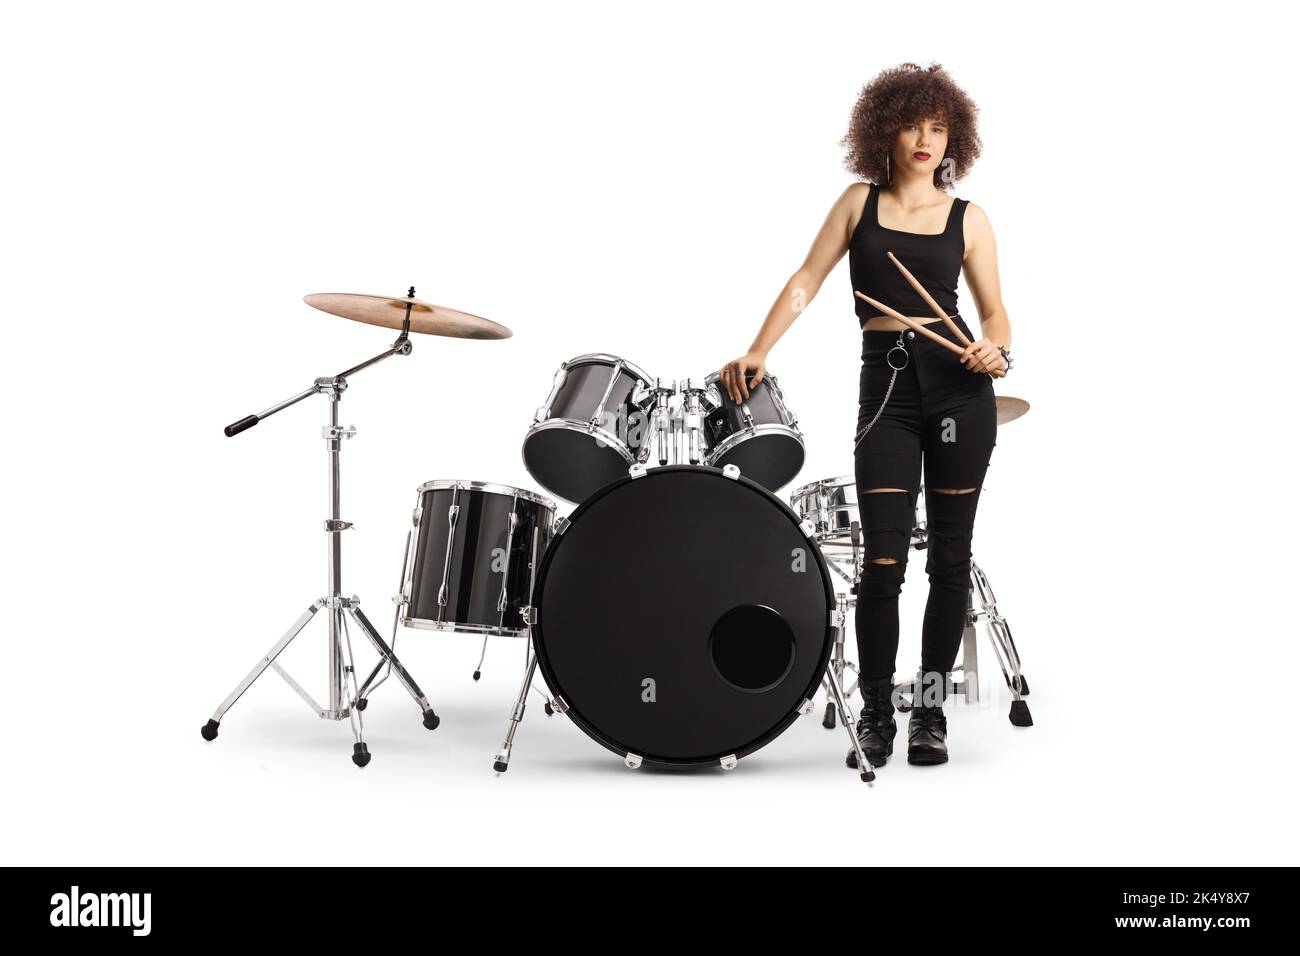 Female drummer standing next to a drum kit and holding drumsticks isolated on white background Stock Photo